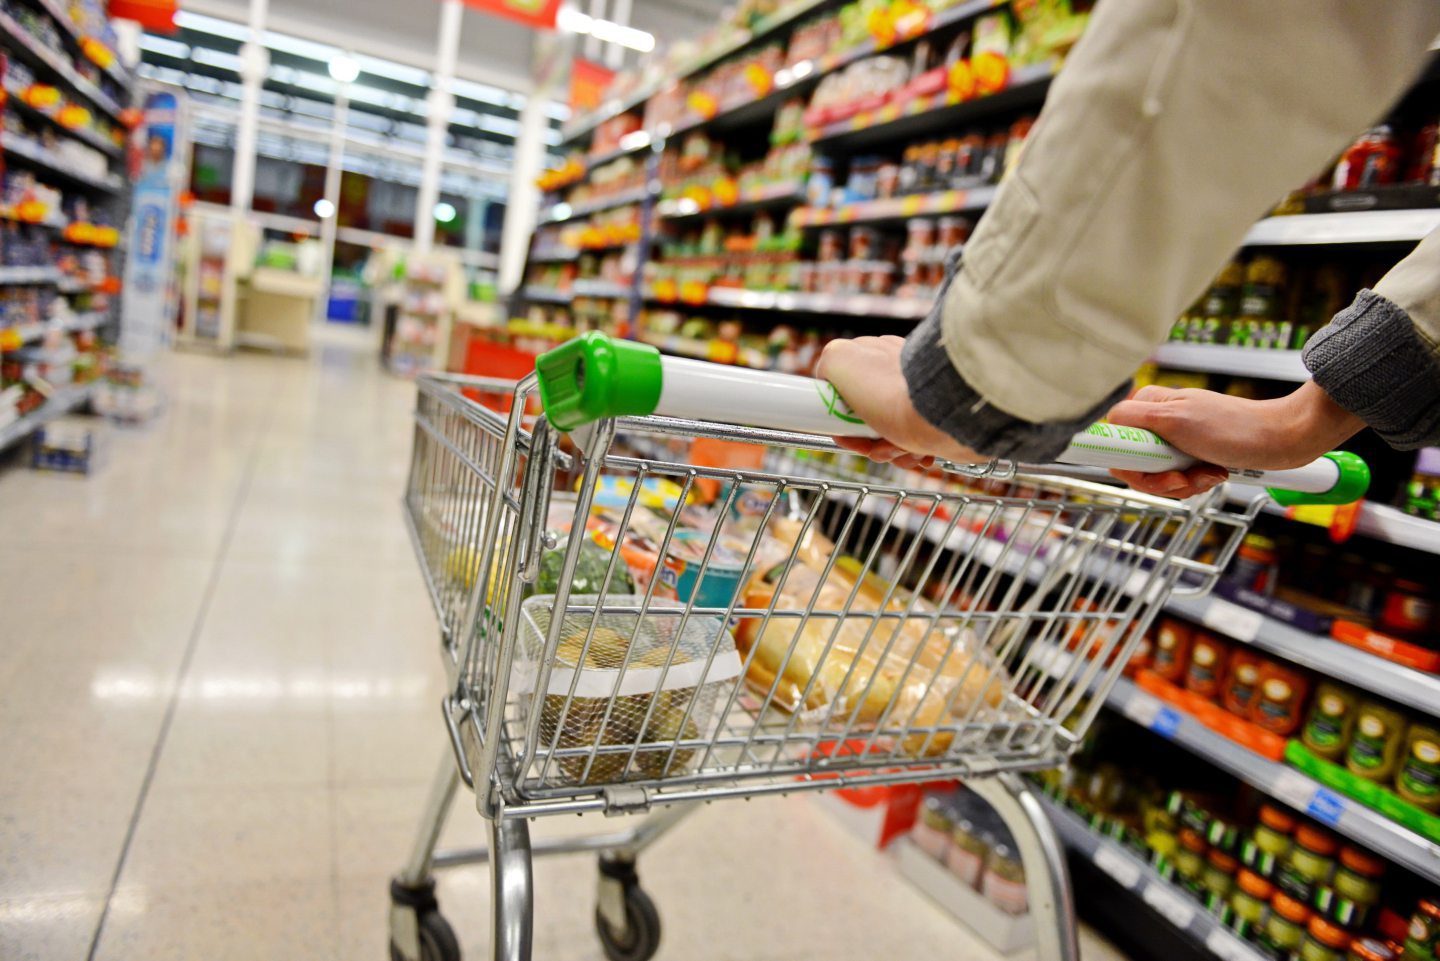 Shoppers are swapping brands and cutting back on meat, fish and fresh produce. Image: Shutterstock